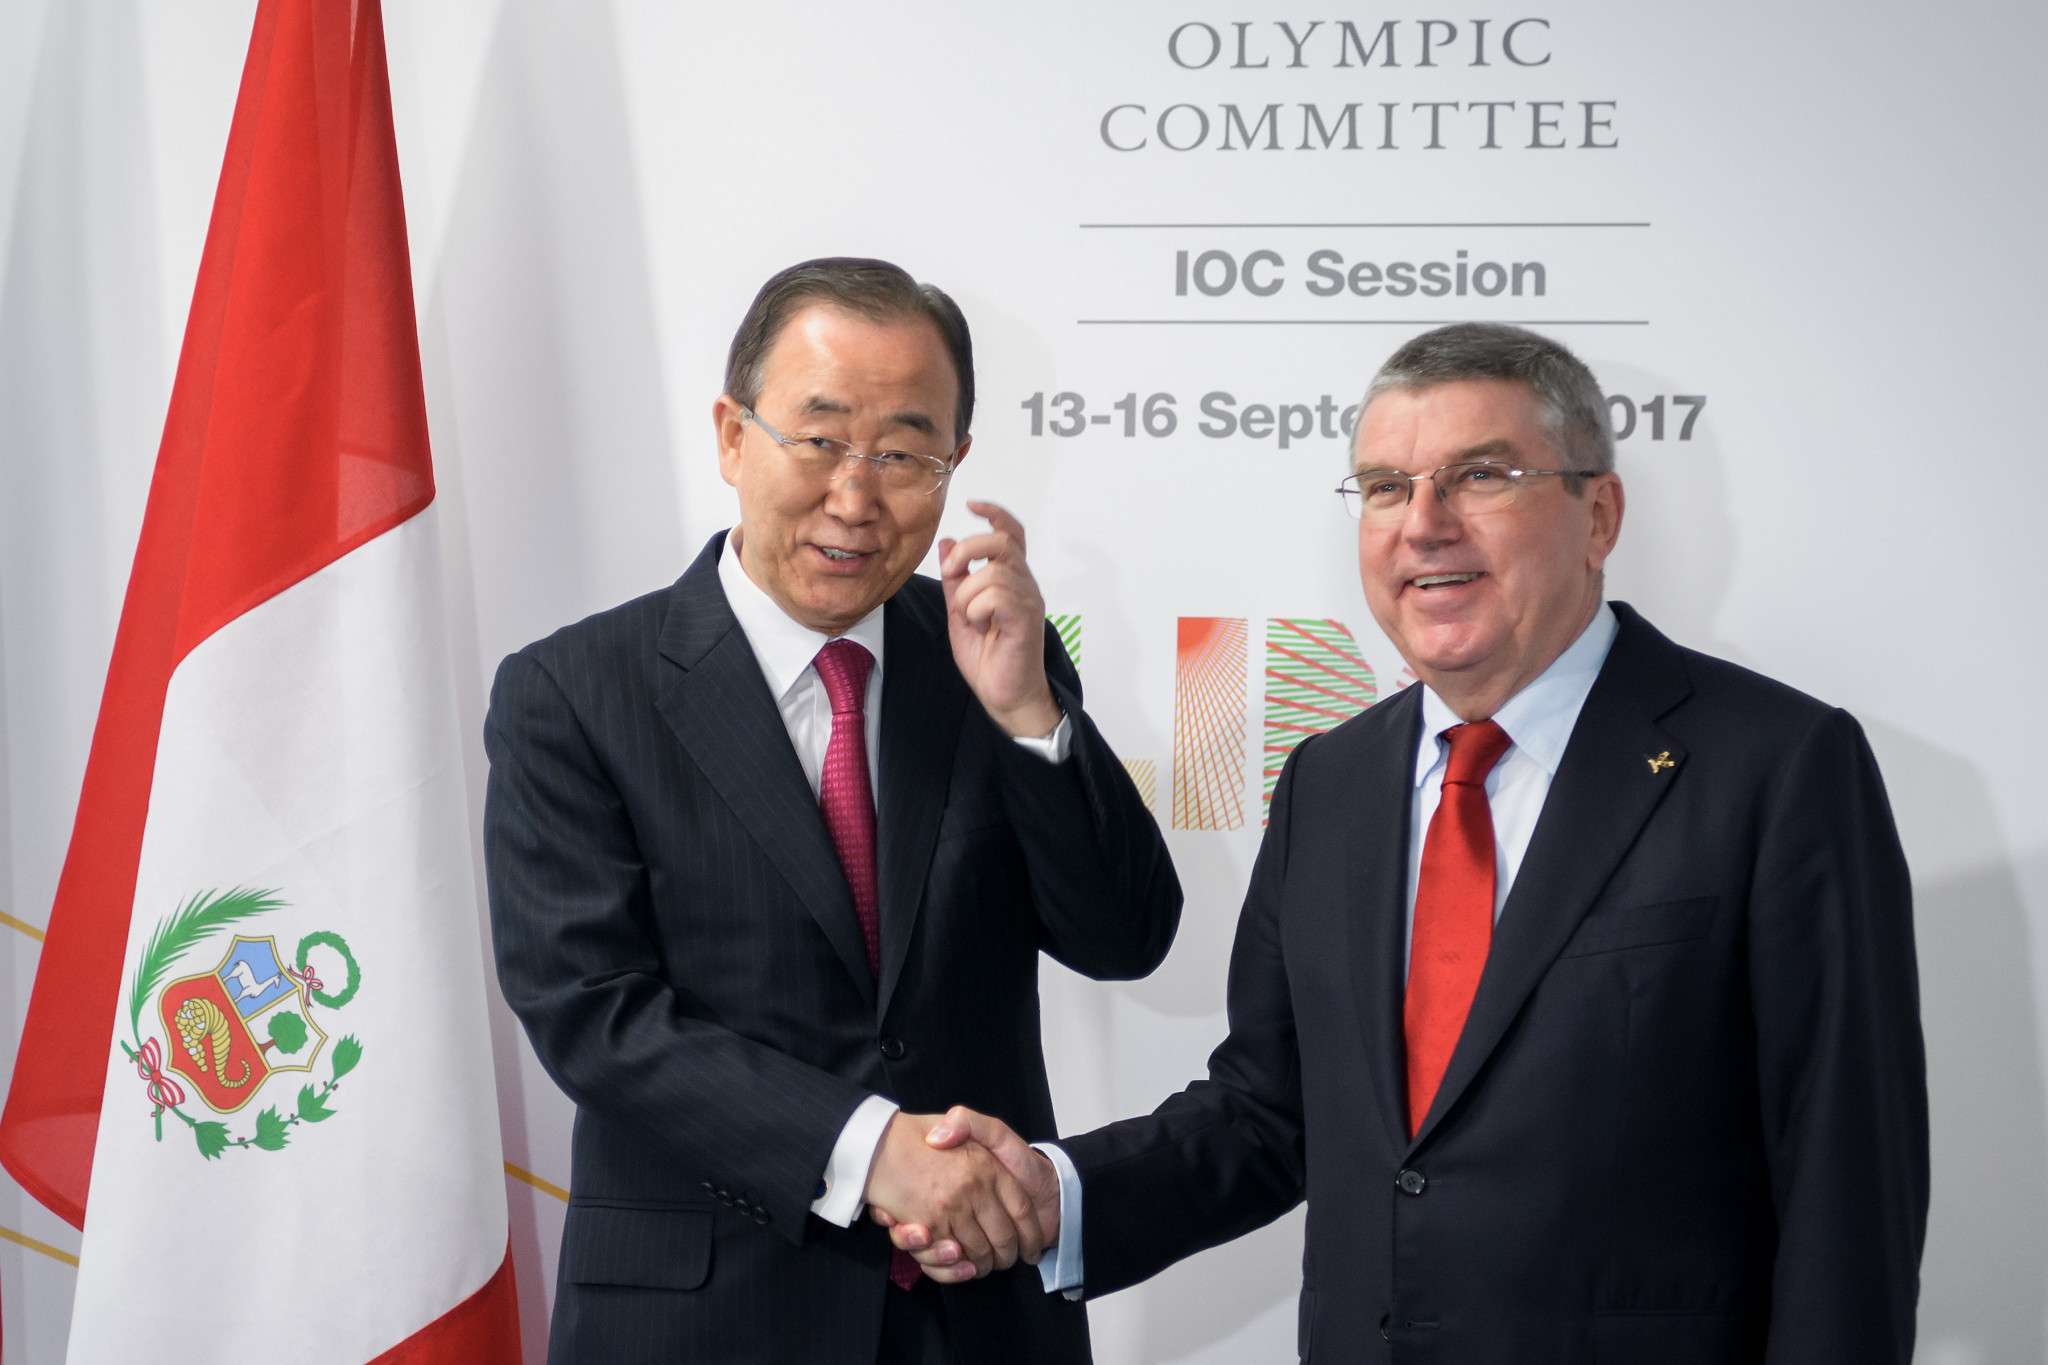 Ban Ki-moon, left, is the new IOC Ethics Commission chair but Thomas Bach, right, seems to still indirectly have more decision-making power ©Getty Images